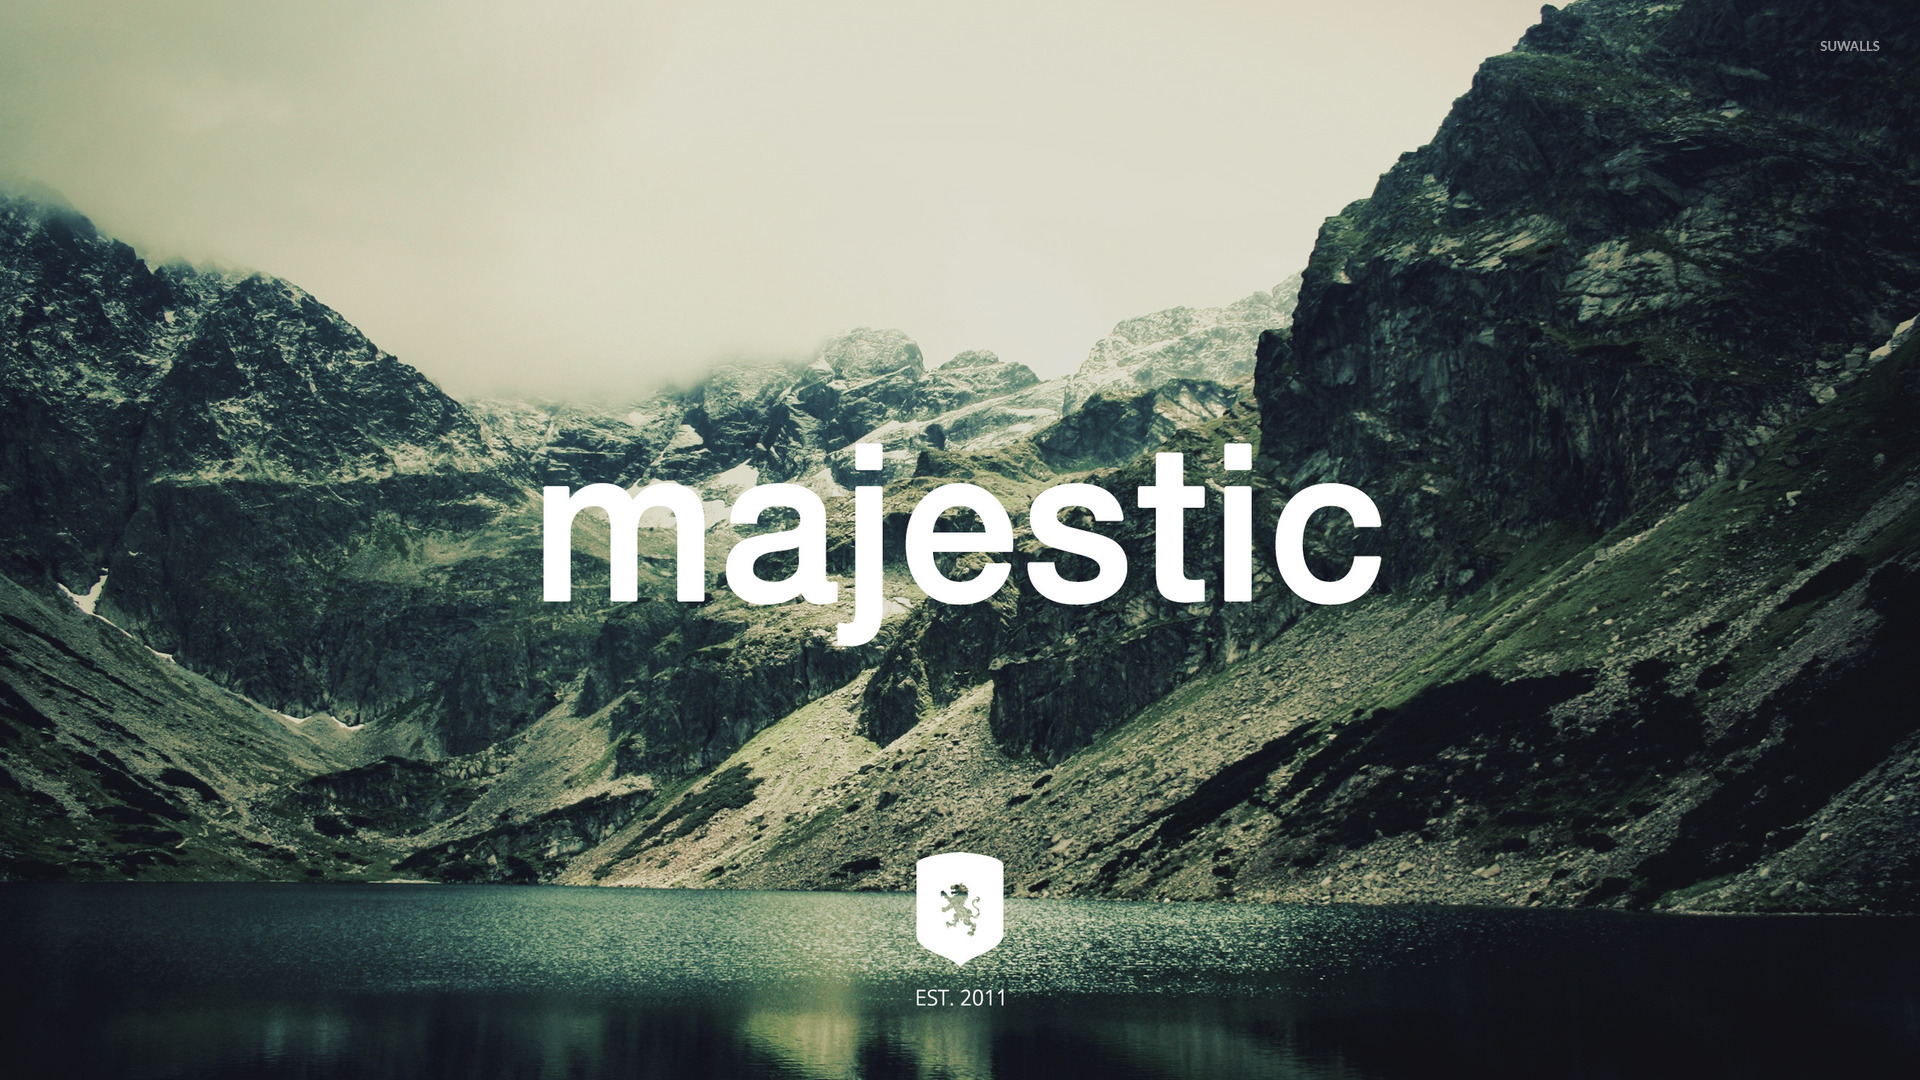 Majestic Casual Logo On A Mountain Lake Wallpaper Music HD Wallpapers Download Free Map Images Wallpaper [wallpaper376.blogspot.com]